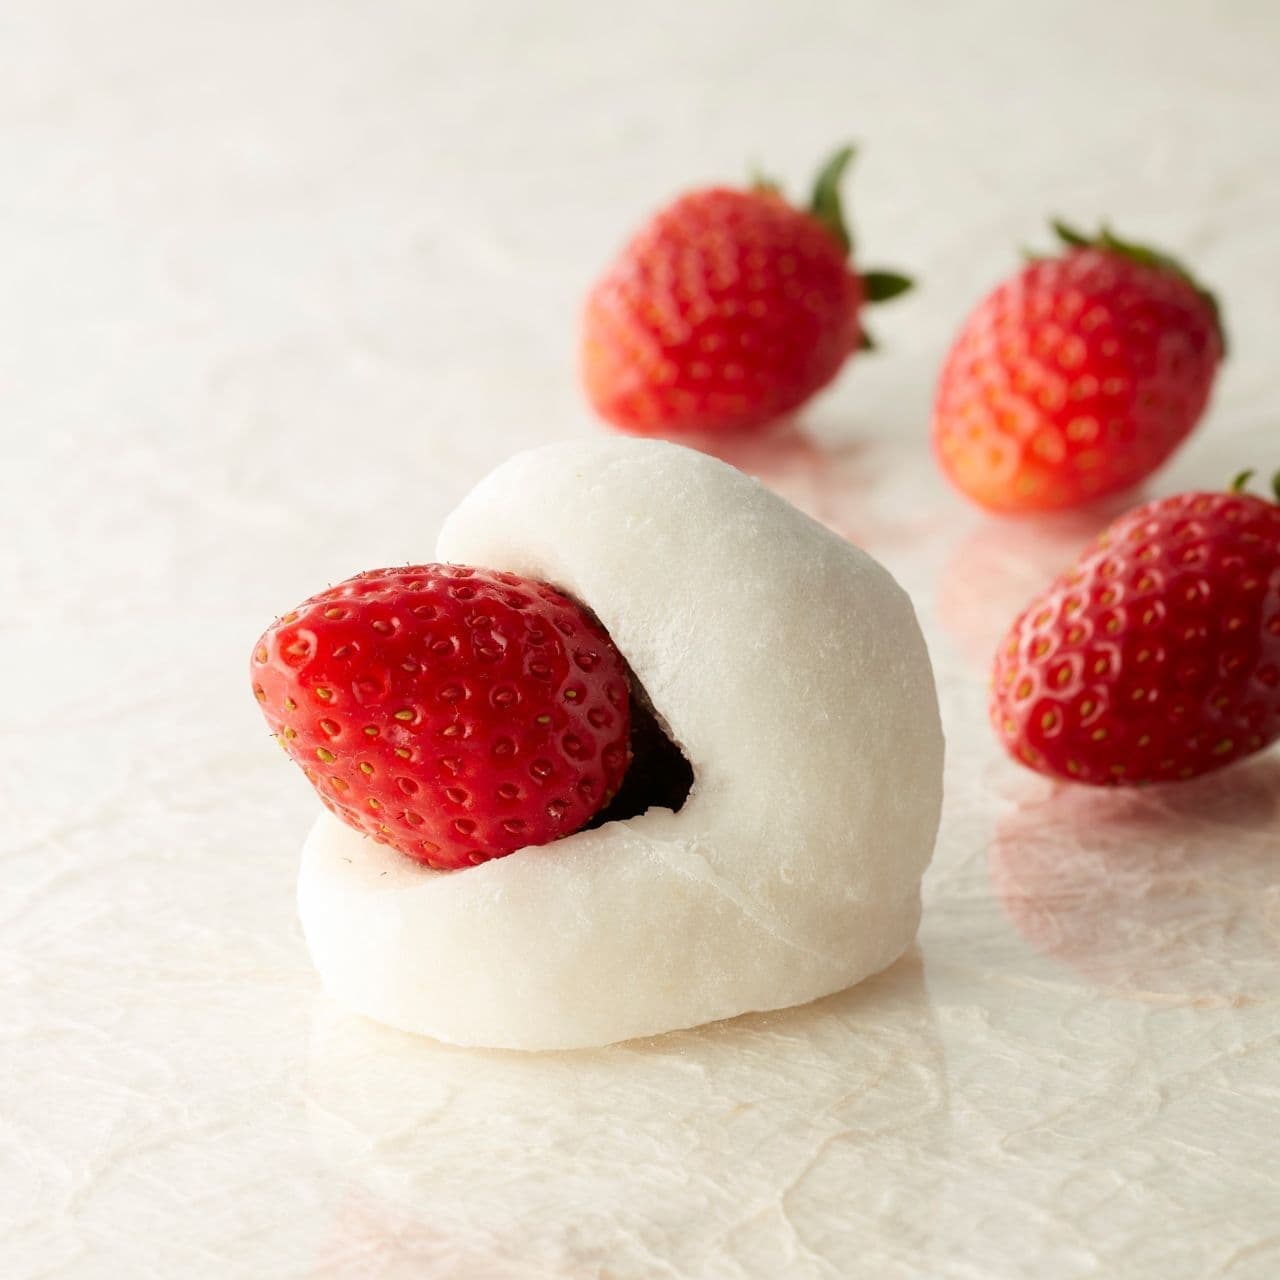 Chateraise "Large Tochi-otchiotome Strawberry Daifuku with Grain Red Bean Paste".